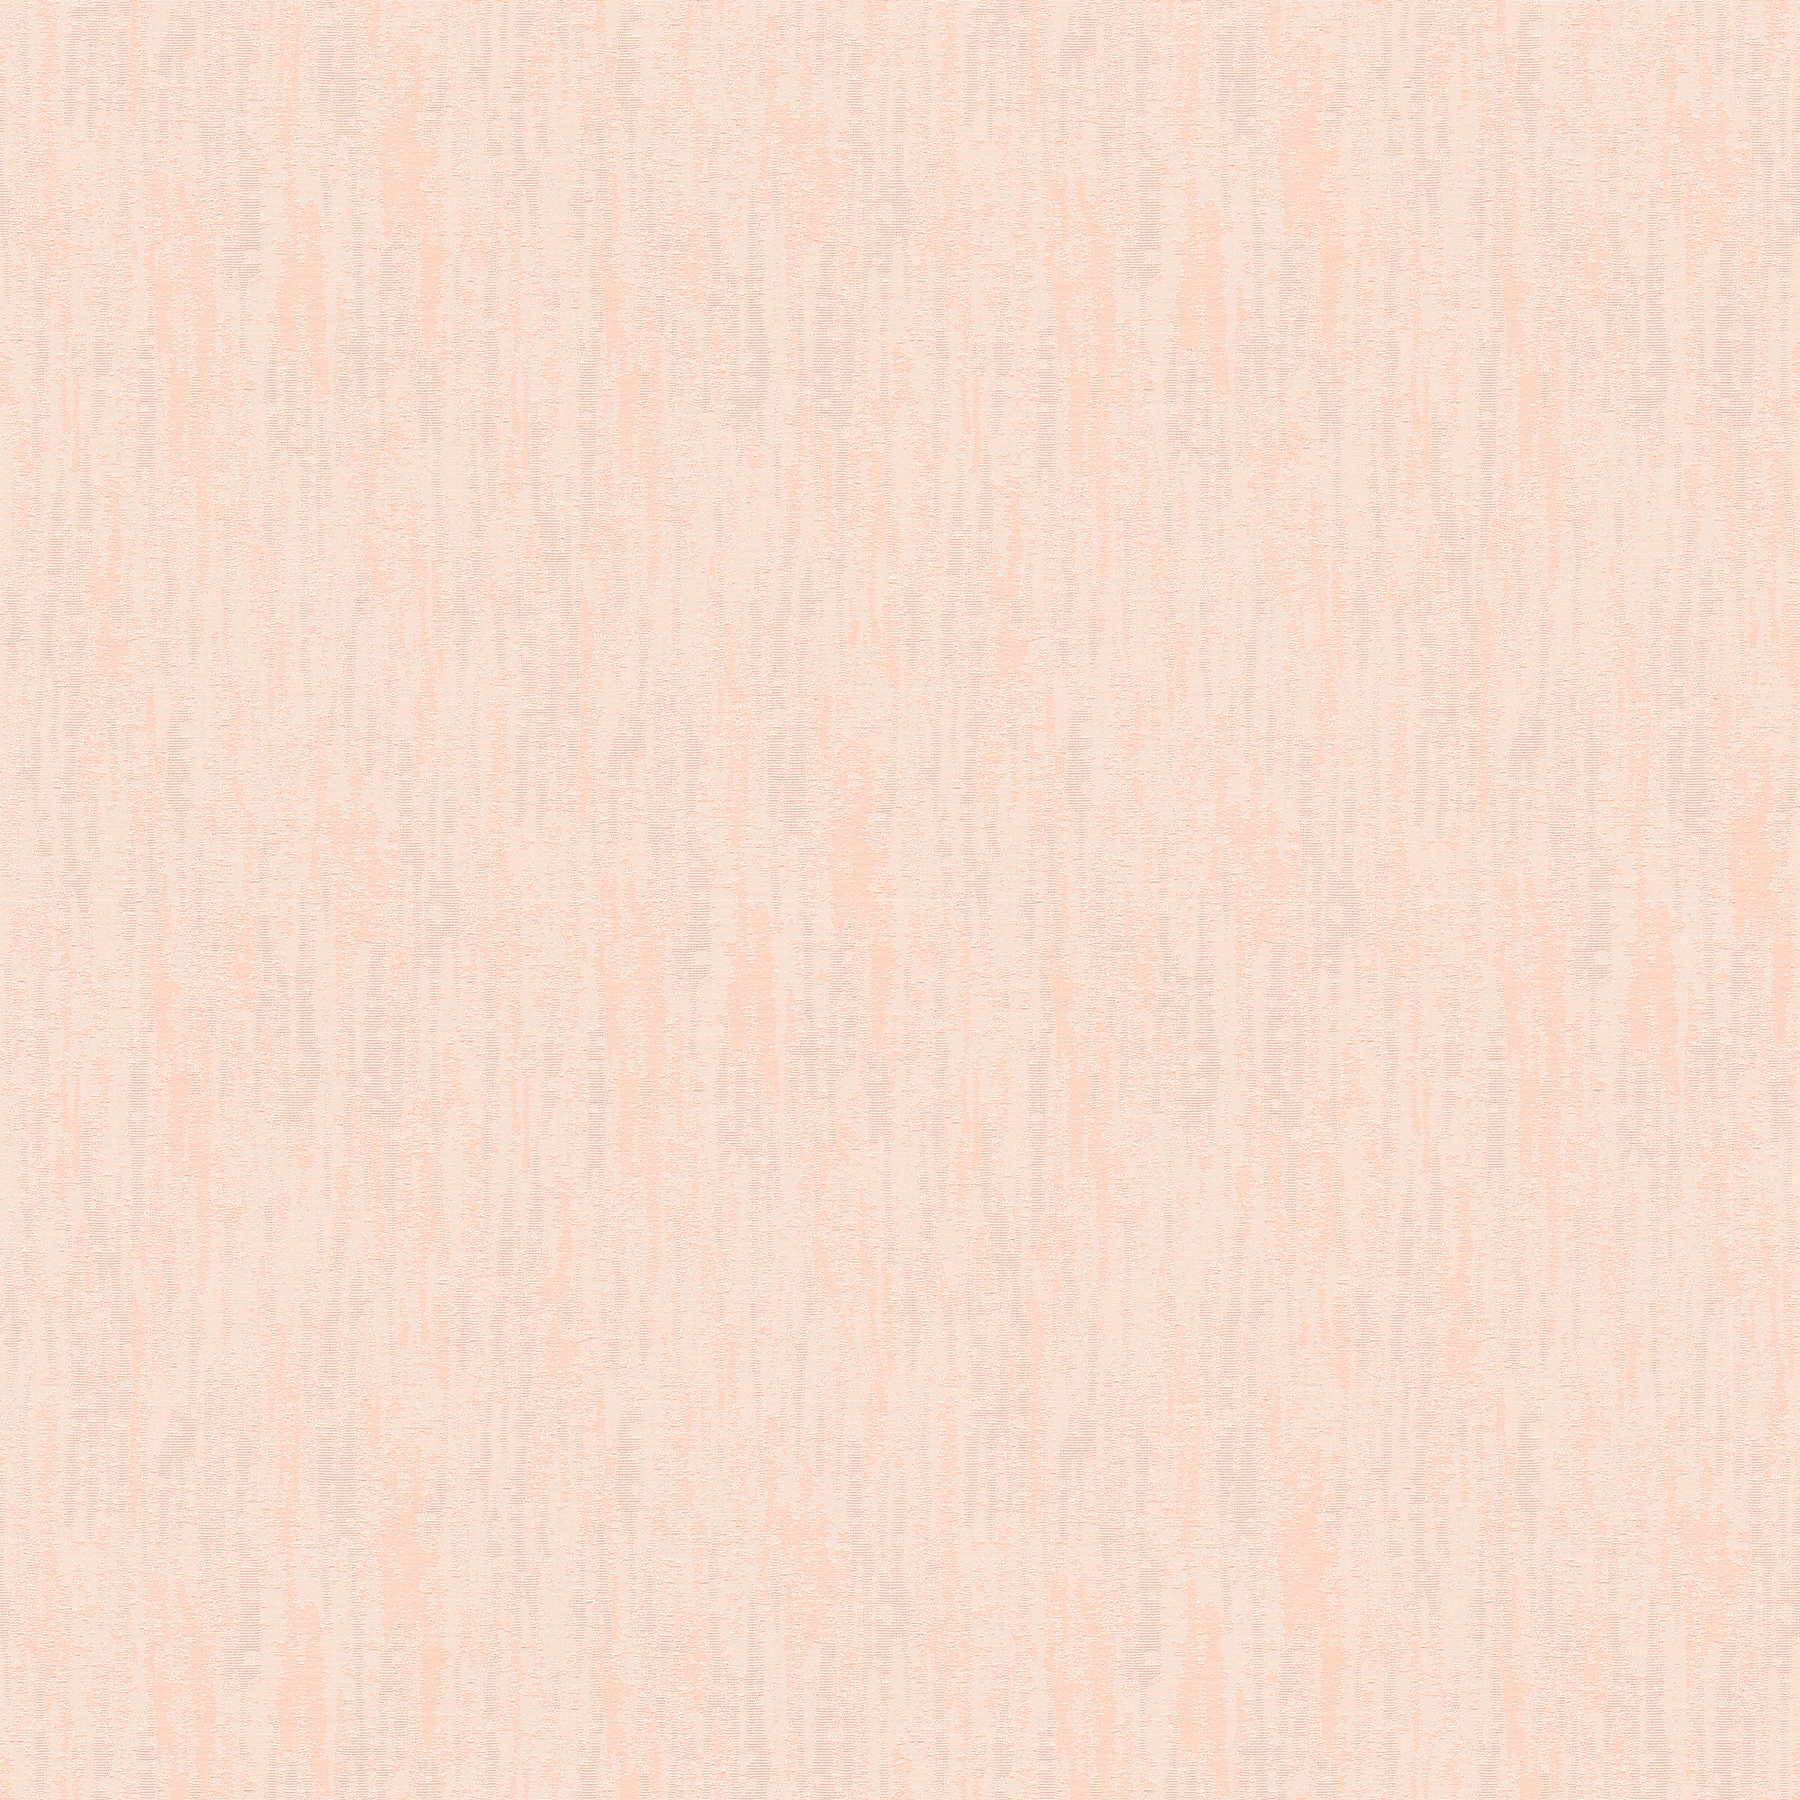 High quality non-woven wallpaper plain with gloss effect - pink
